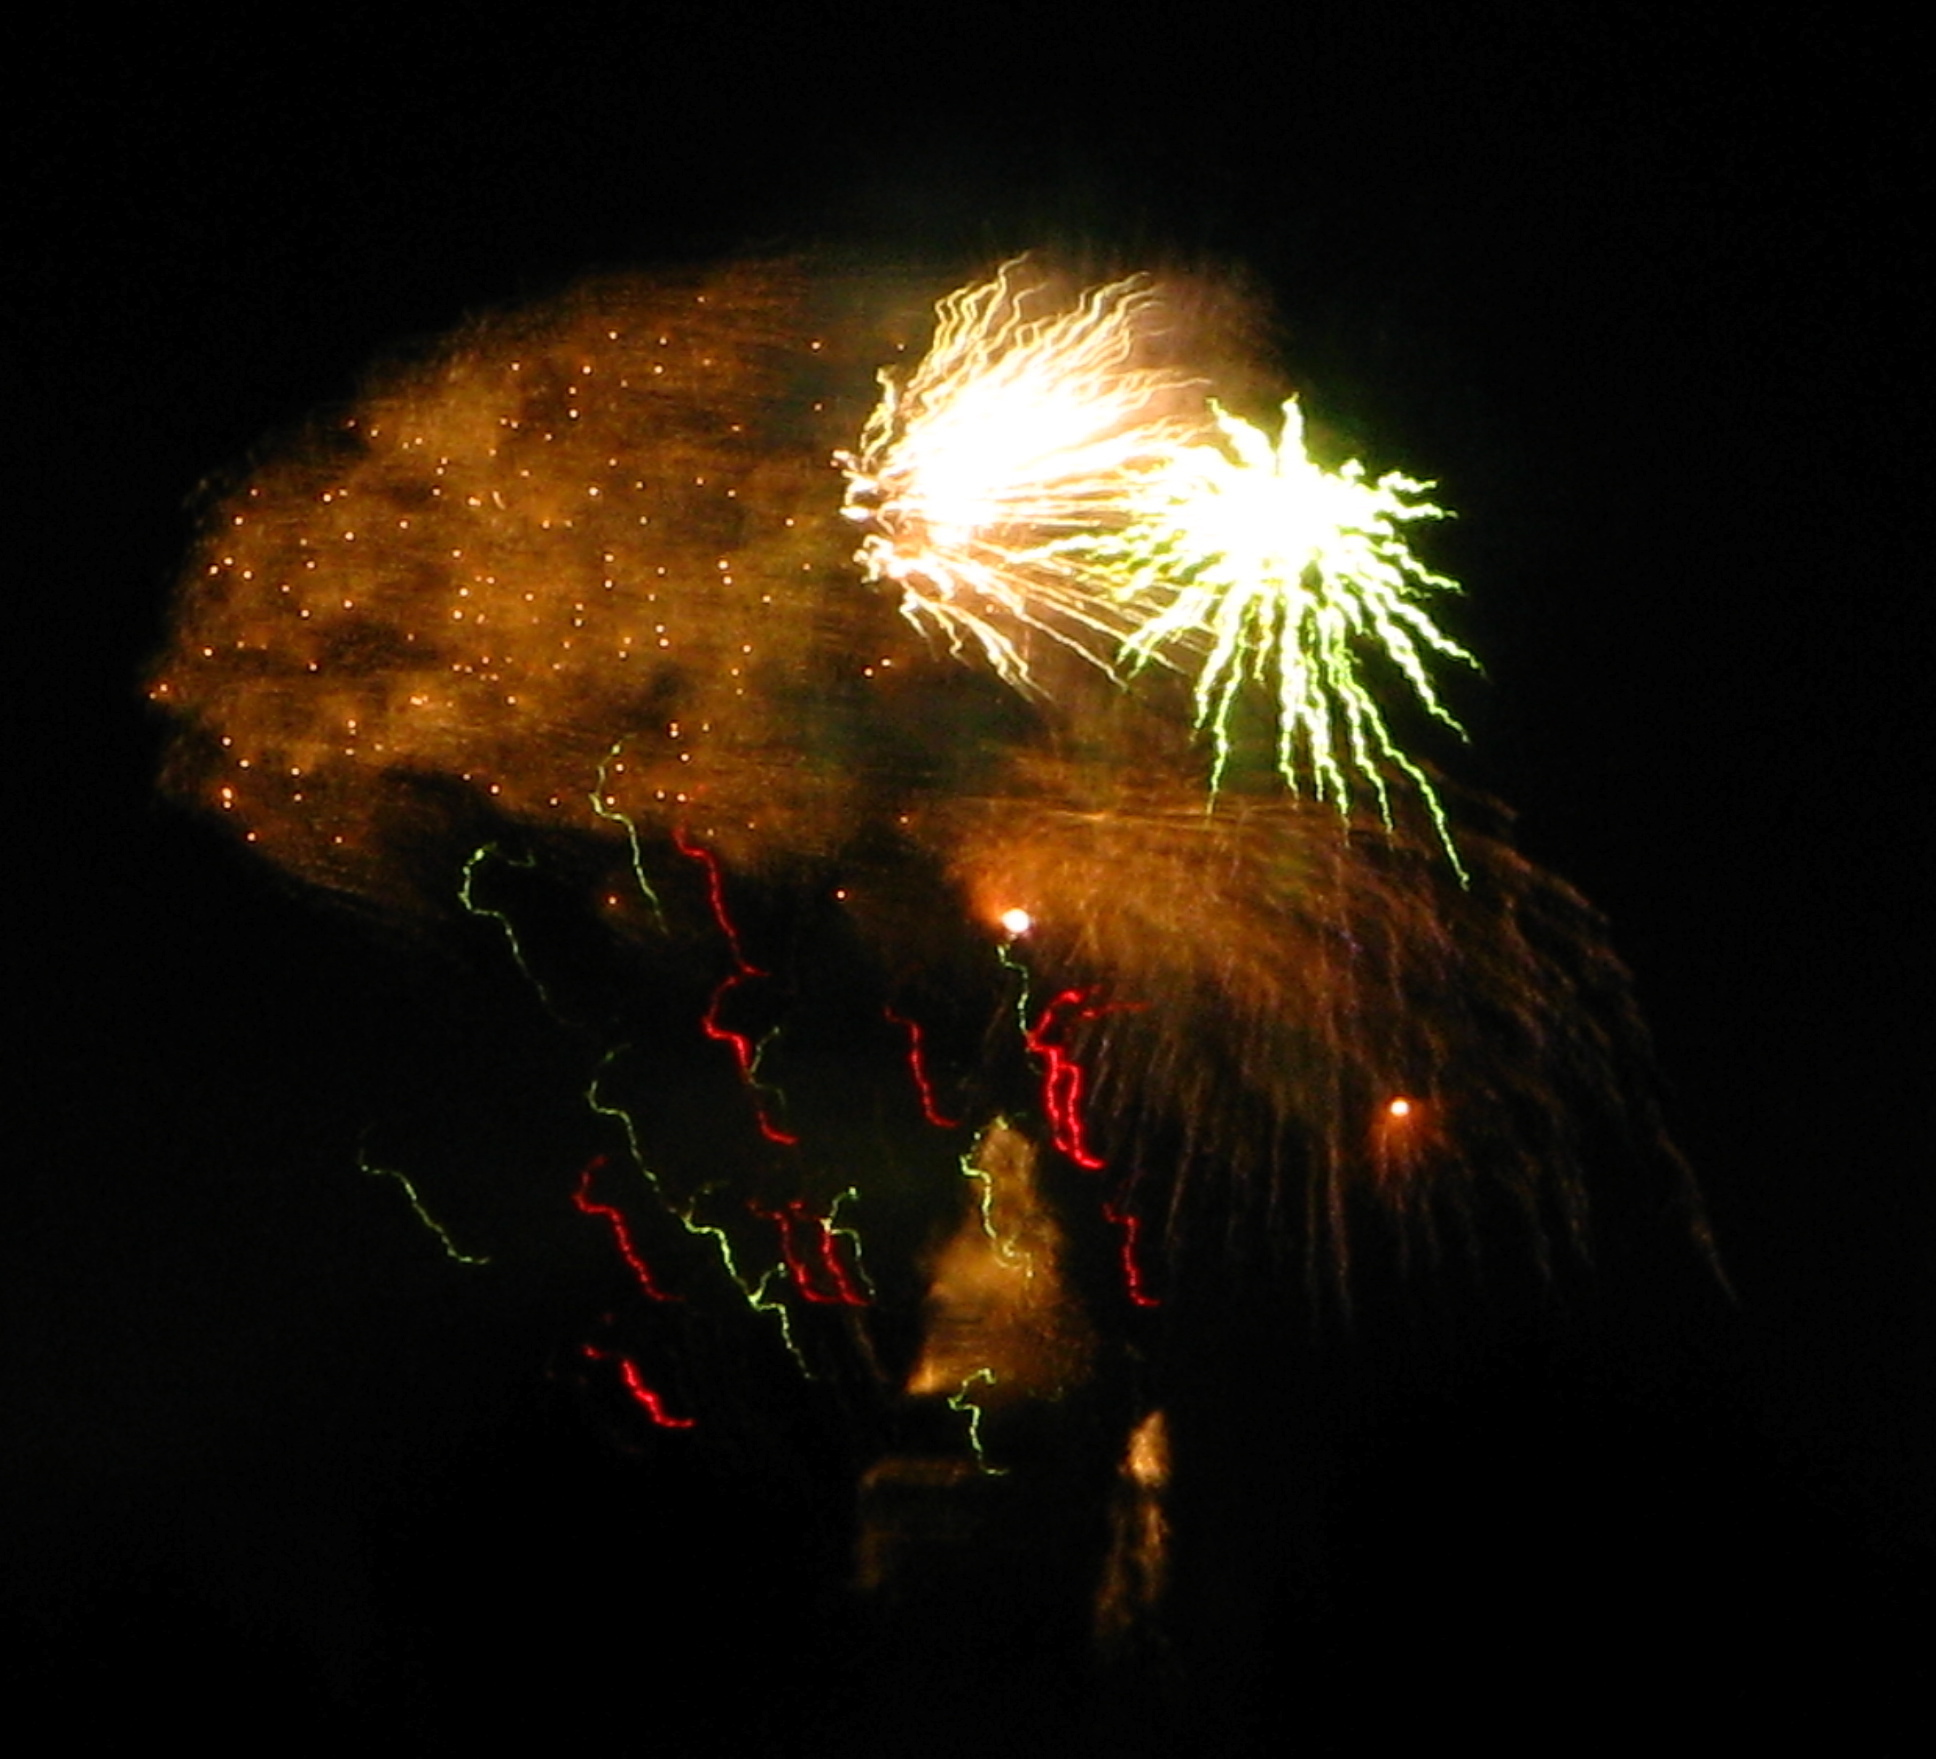 What Happens to Your Brain When You Watch Fireworks? | Inverse